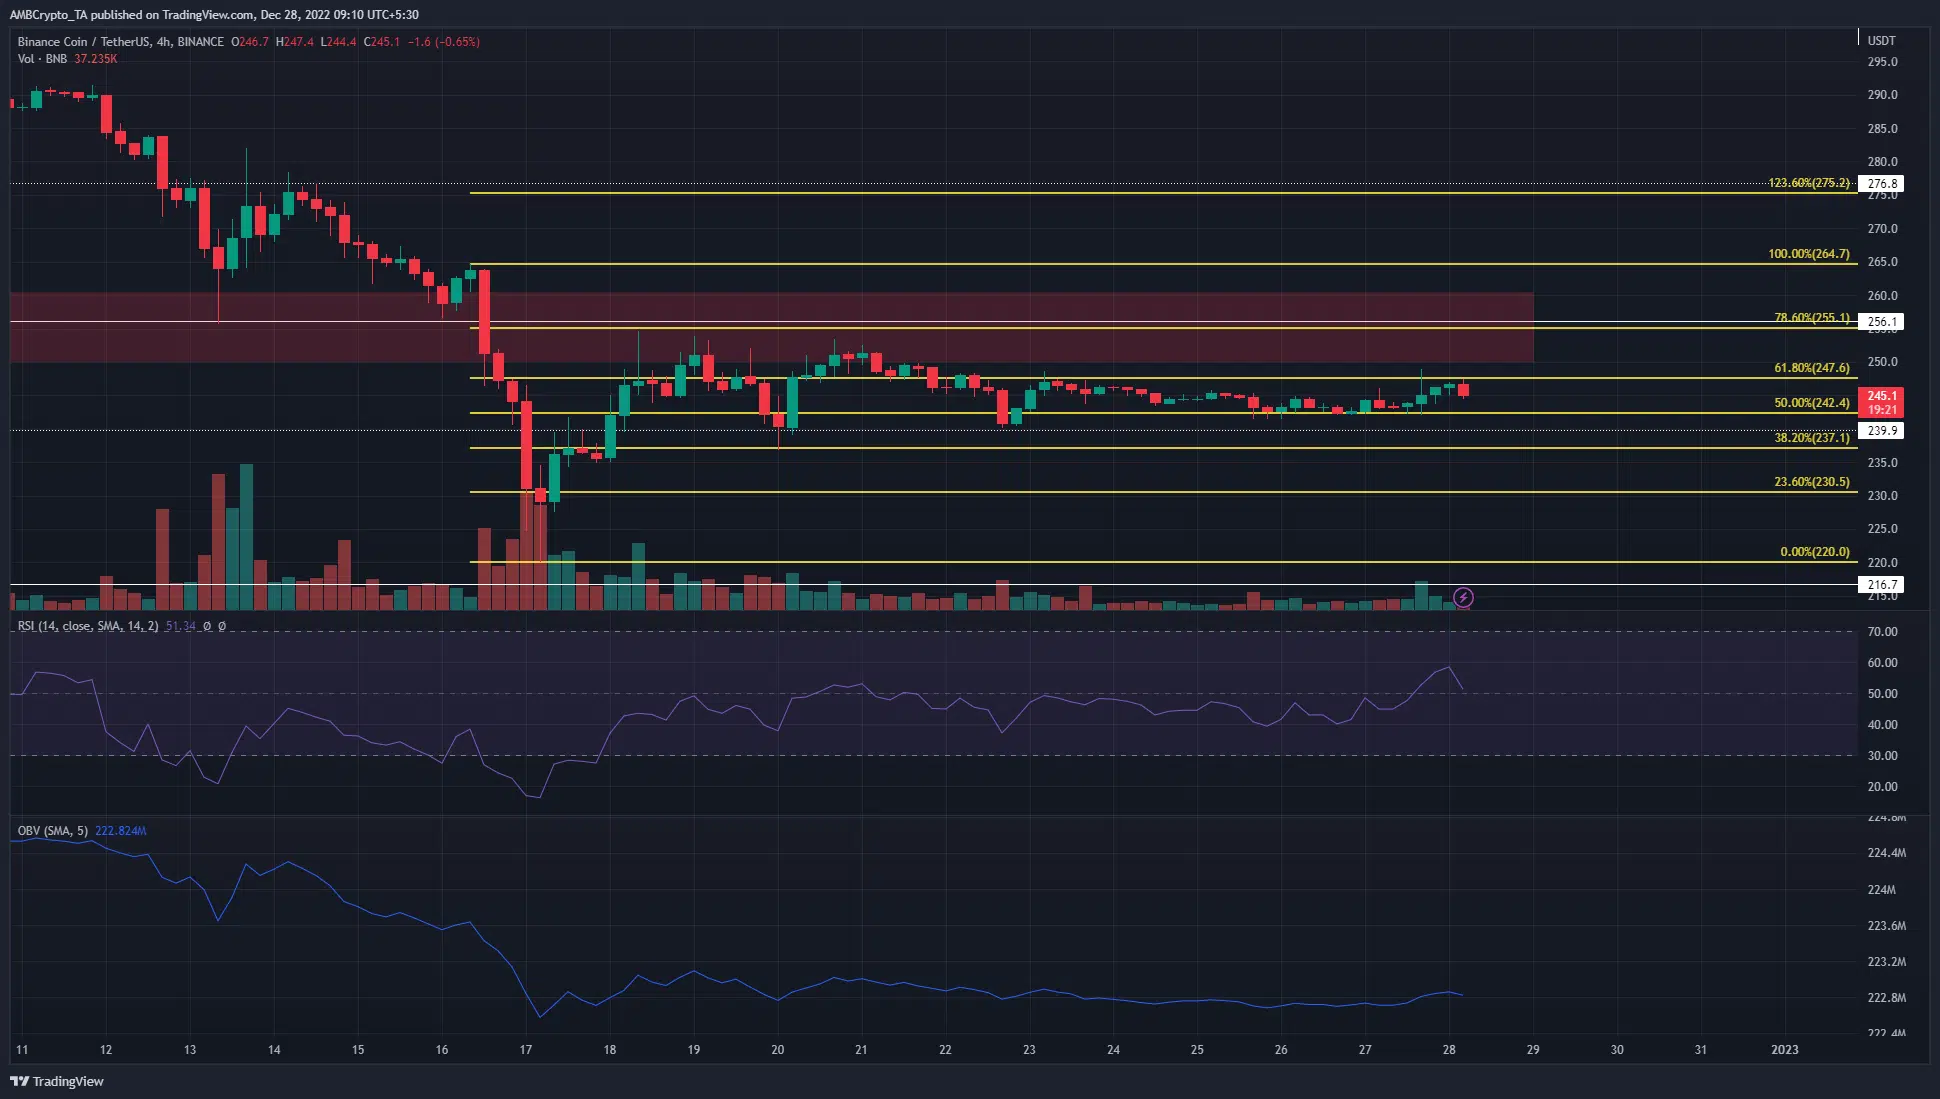 Binance Coin forms a short-term range under resistance- can it break out?